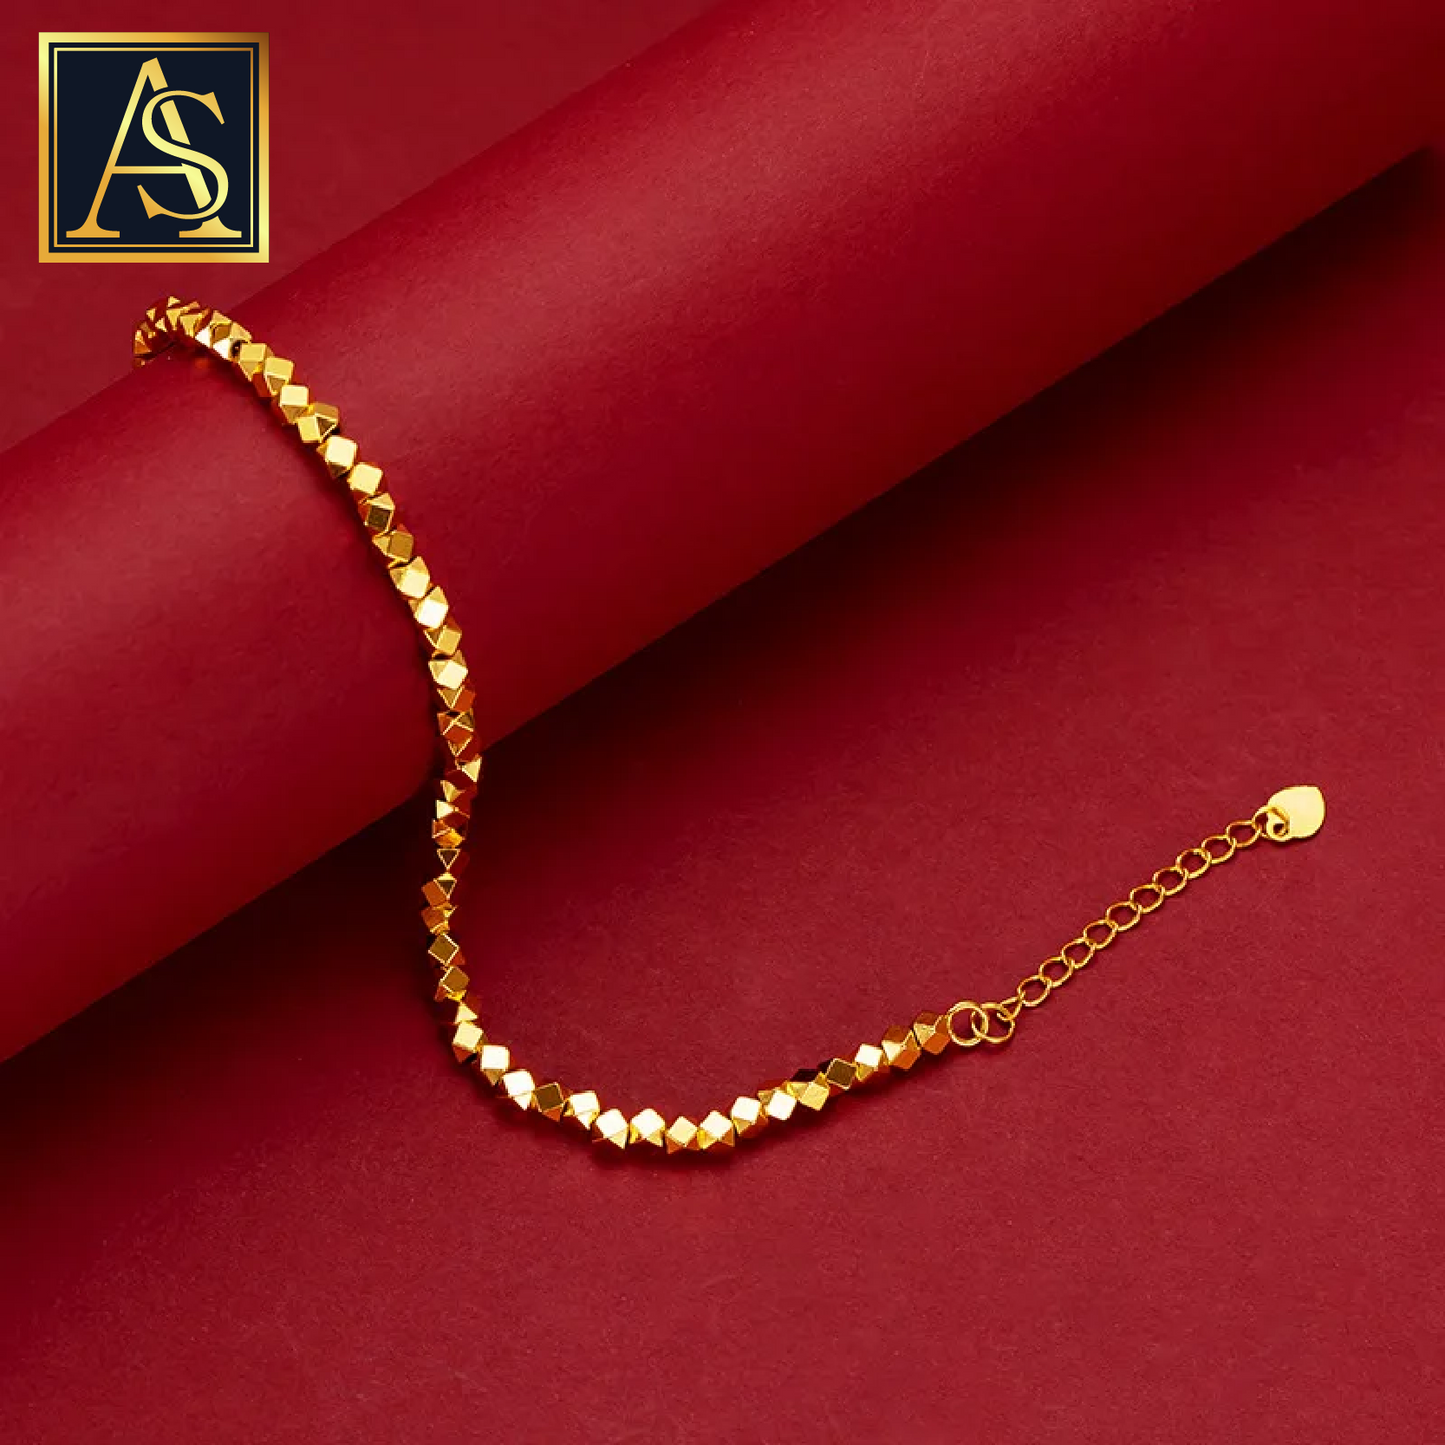 ASIL STORE : Beauty Bracelet 18K Real Gold Chain for Women Fashion Pure Adjustable Chain for Women Fine Jewelry Gift Model number : 303